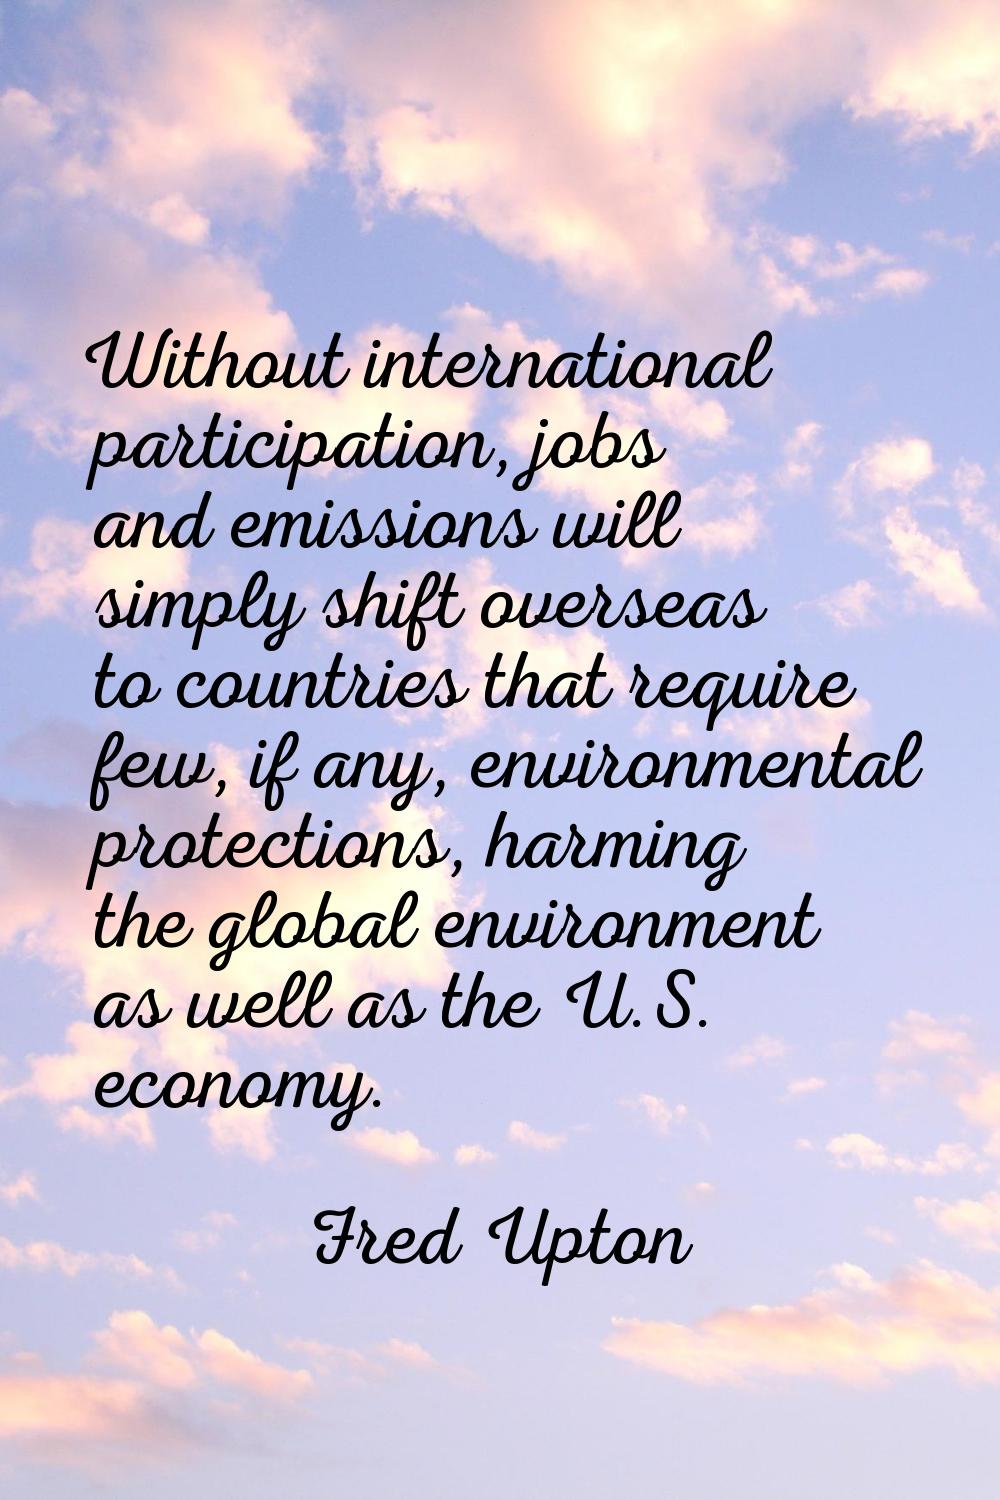 Without international participation, jobs and emissions will simply shift overseas to countries tha